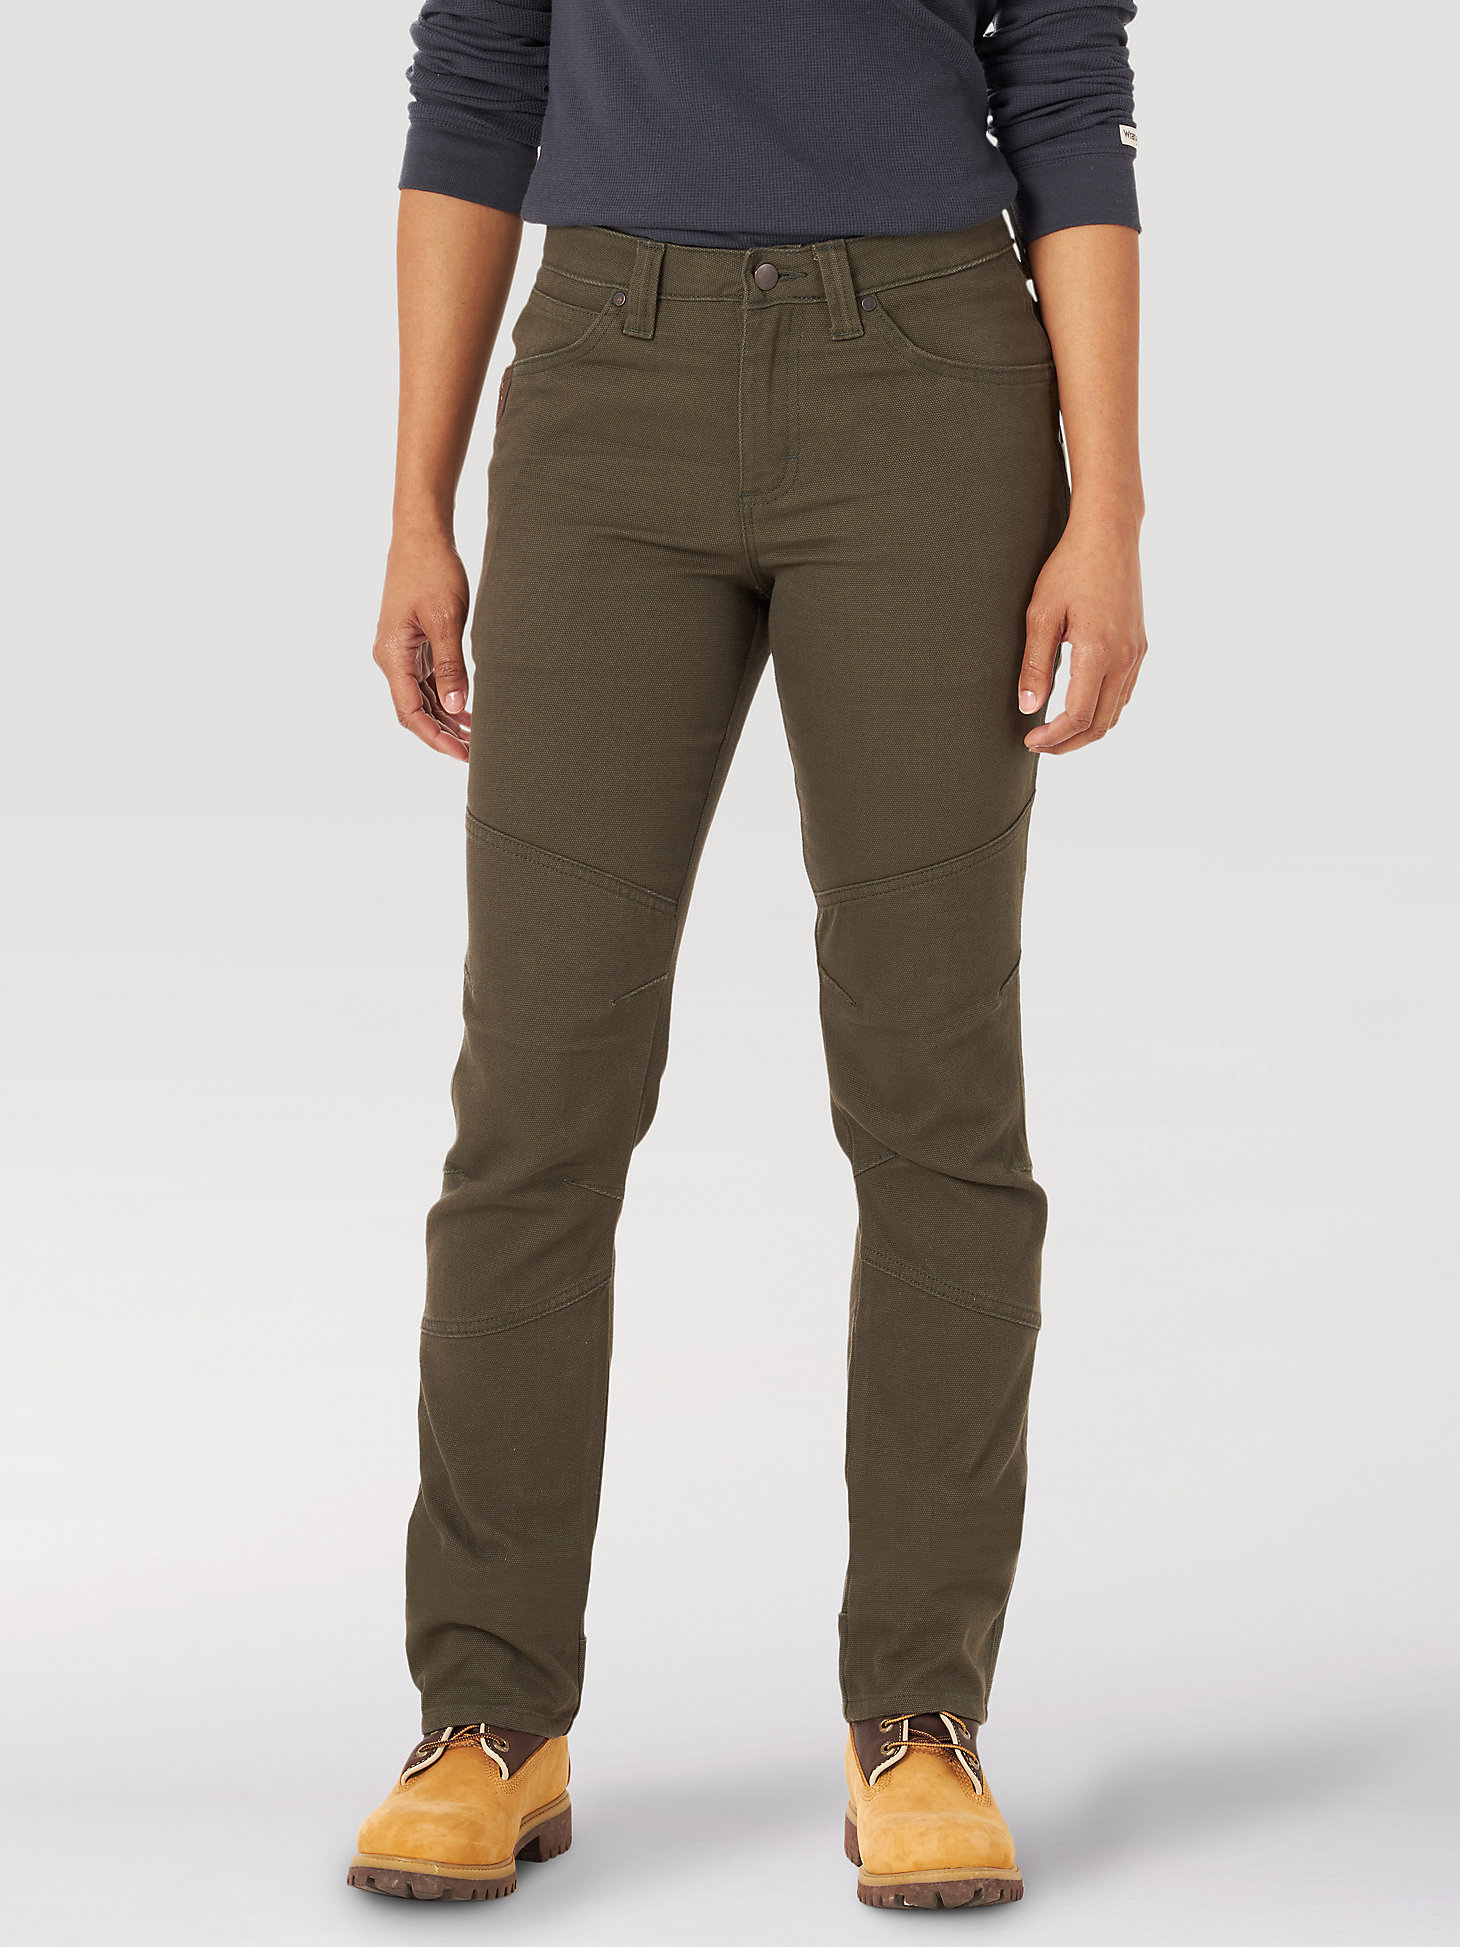 Women's Wrangler® RIGGS Workwear® Straight Fit Utility Work Pant